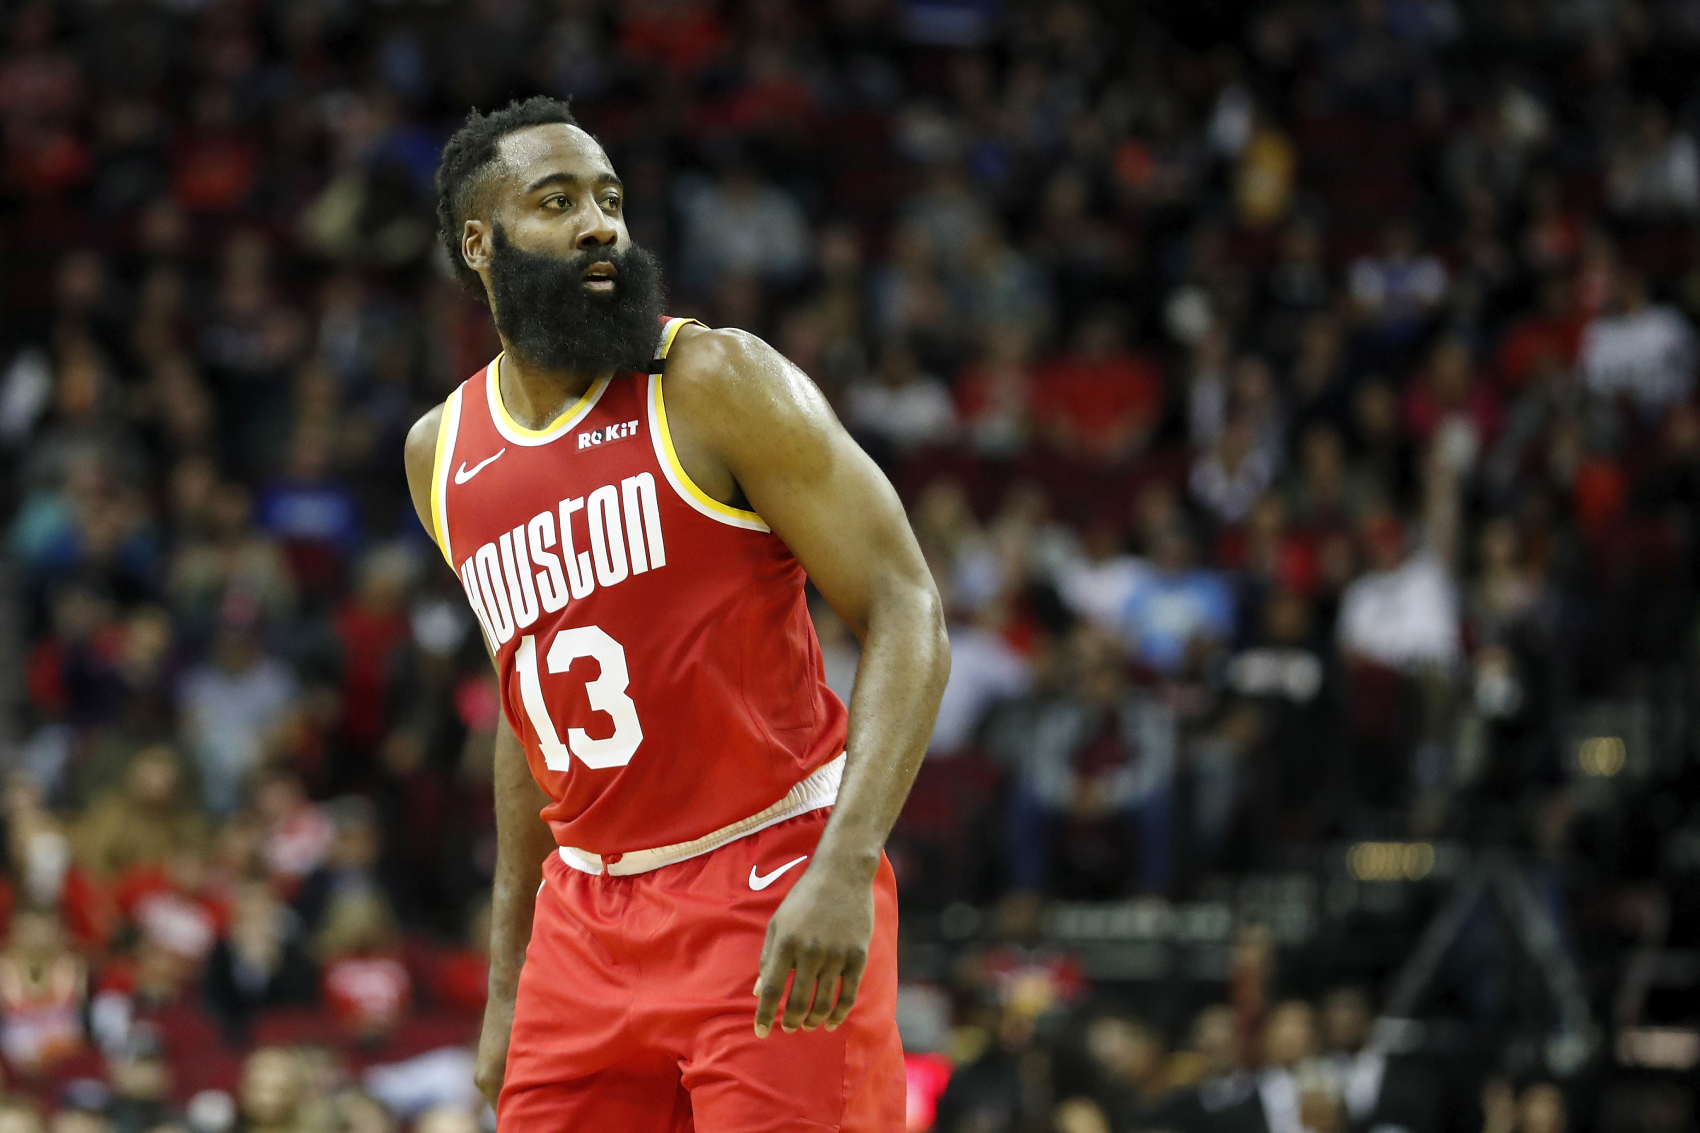 James Harden's future with the Houston Rockets is very unclear. However, Rockets coach Stephen Silas recently sent a strong message about it.